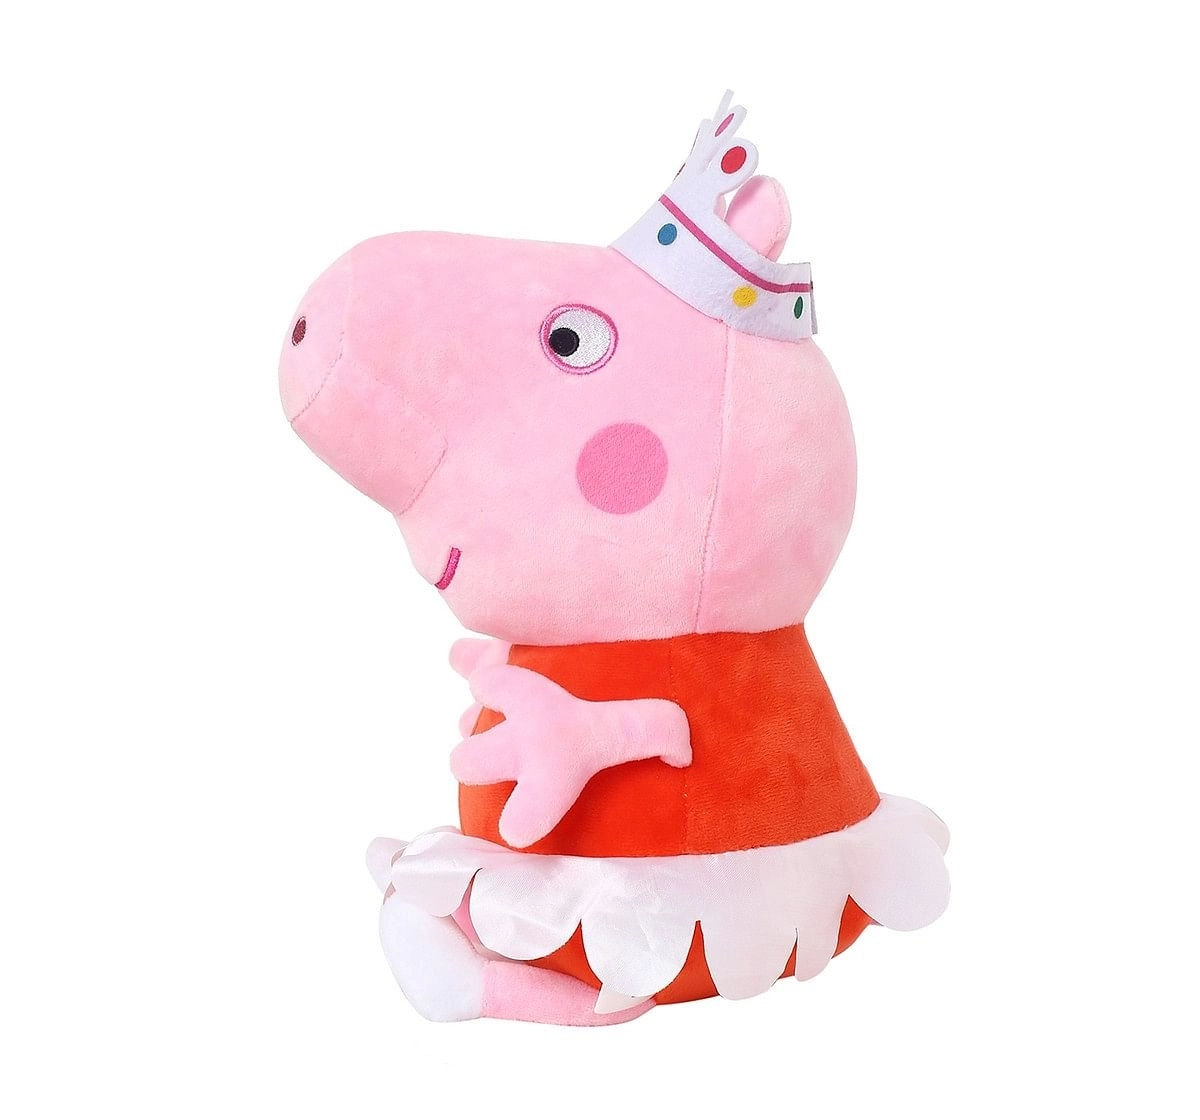 Peppa Pig with Crown Multi Color 30 Cm Soft Toy for Kids age 3Y+ - 13 Cm 